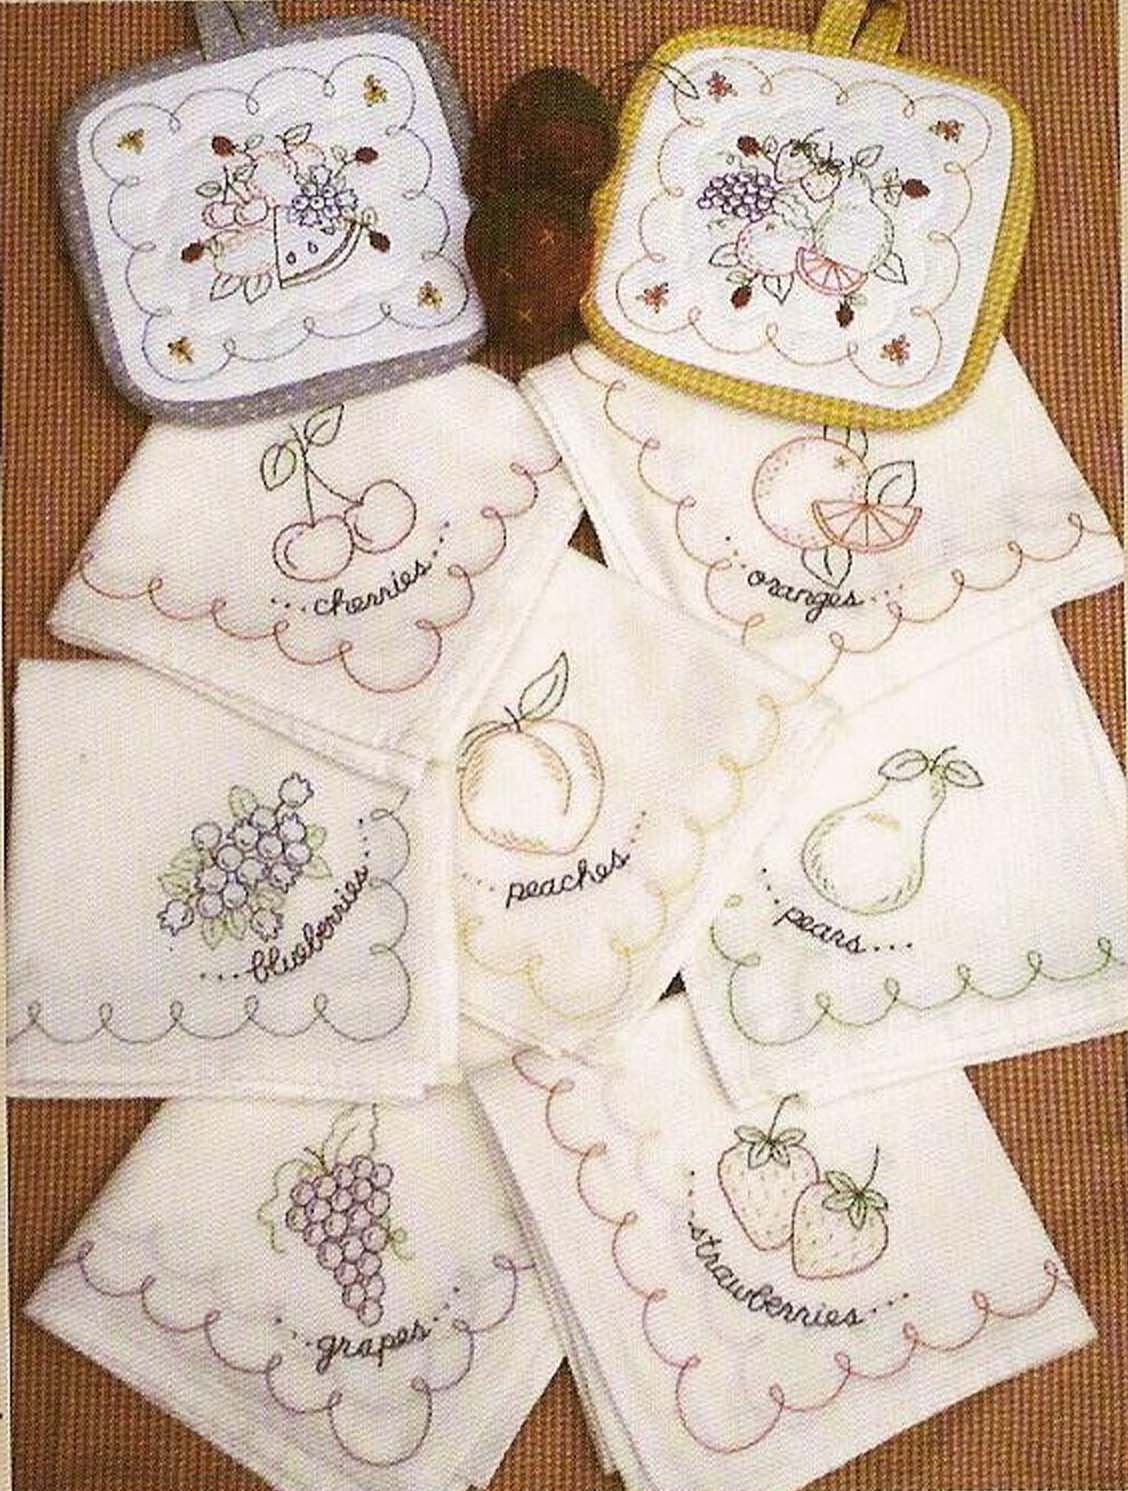 lot of 6 Matching Vintage Handmade flour sack Dish Towels embroidery